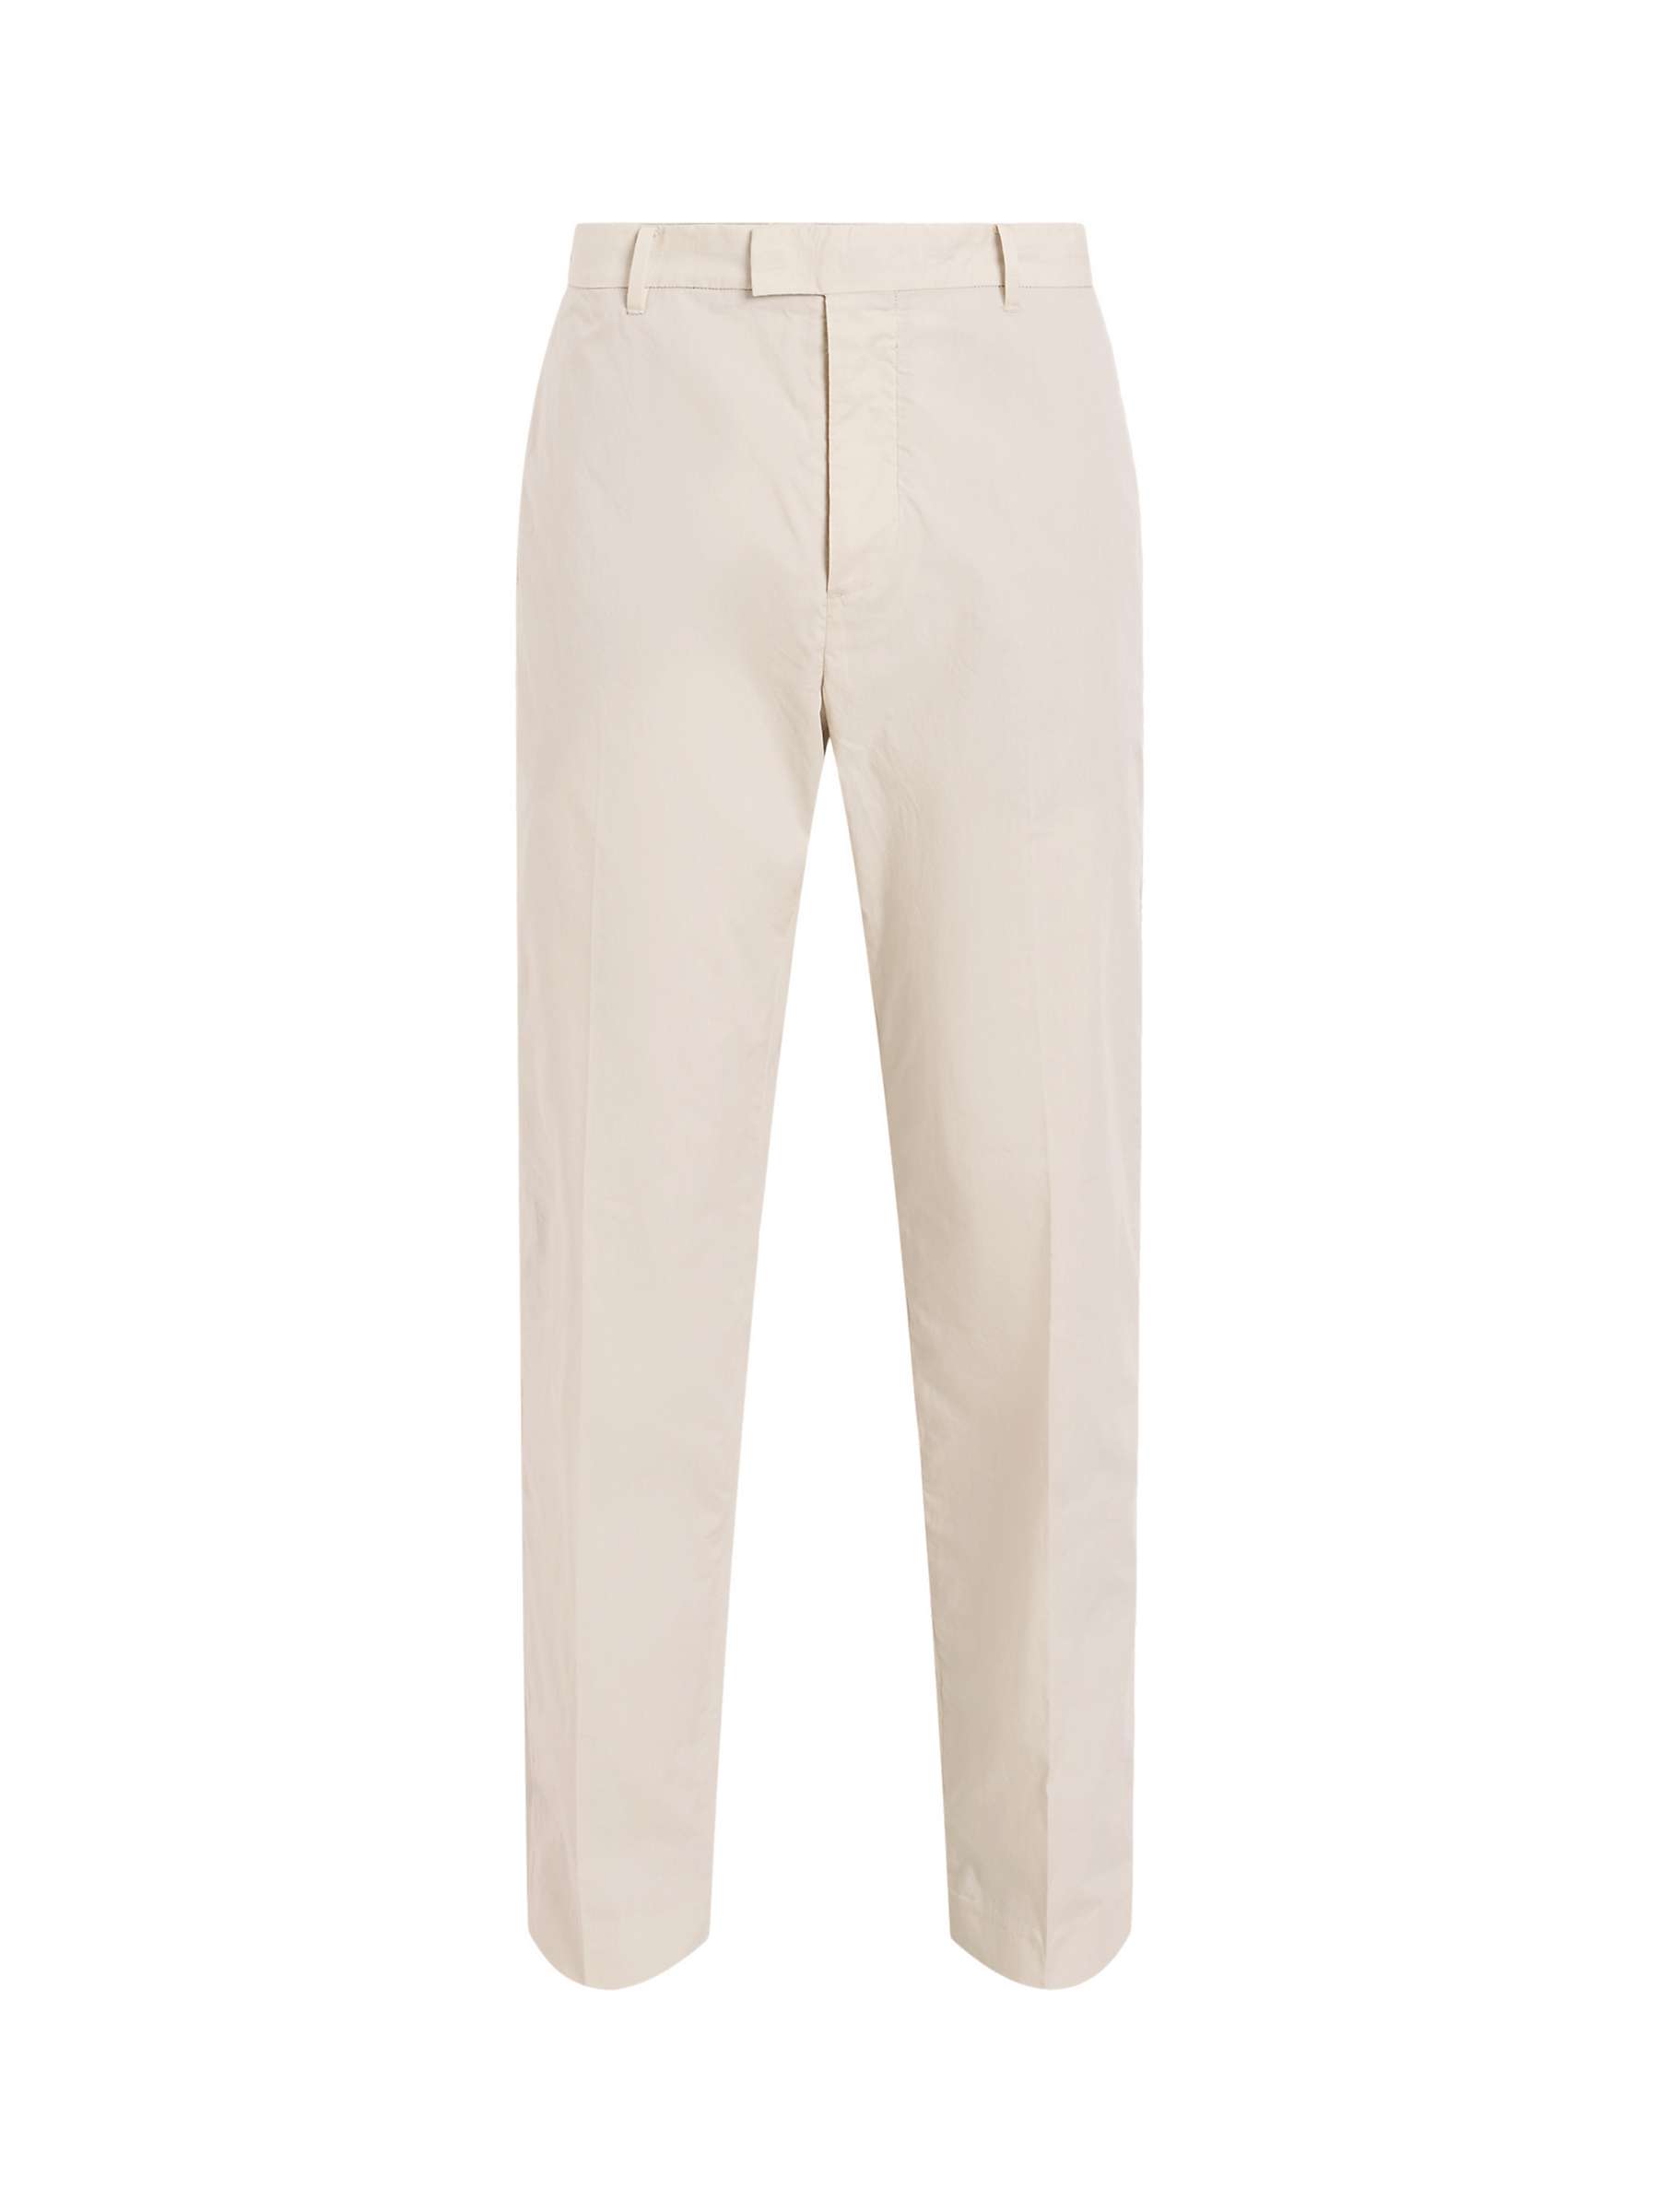 Buy AllSaints Mars Trousers, Bailey Taupe Online at johnlewis.com